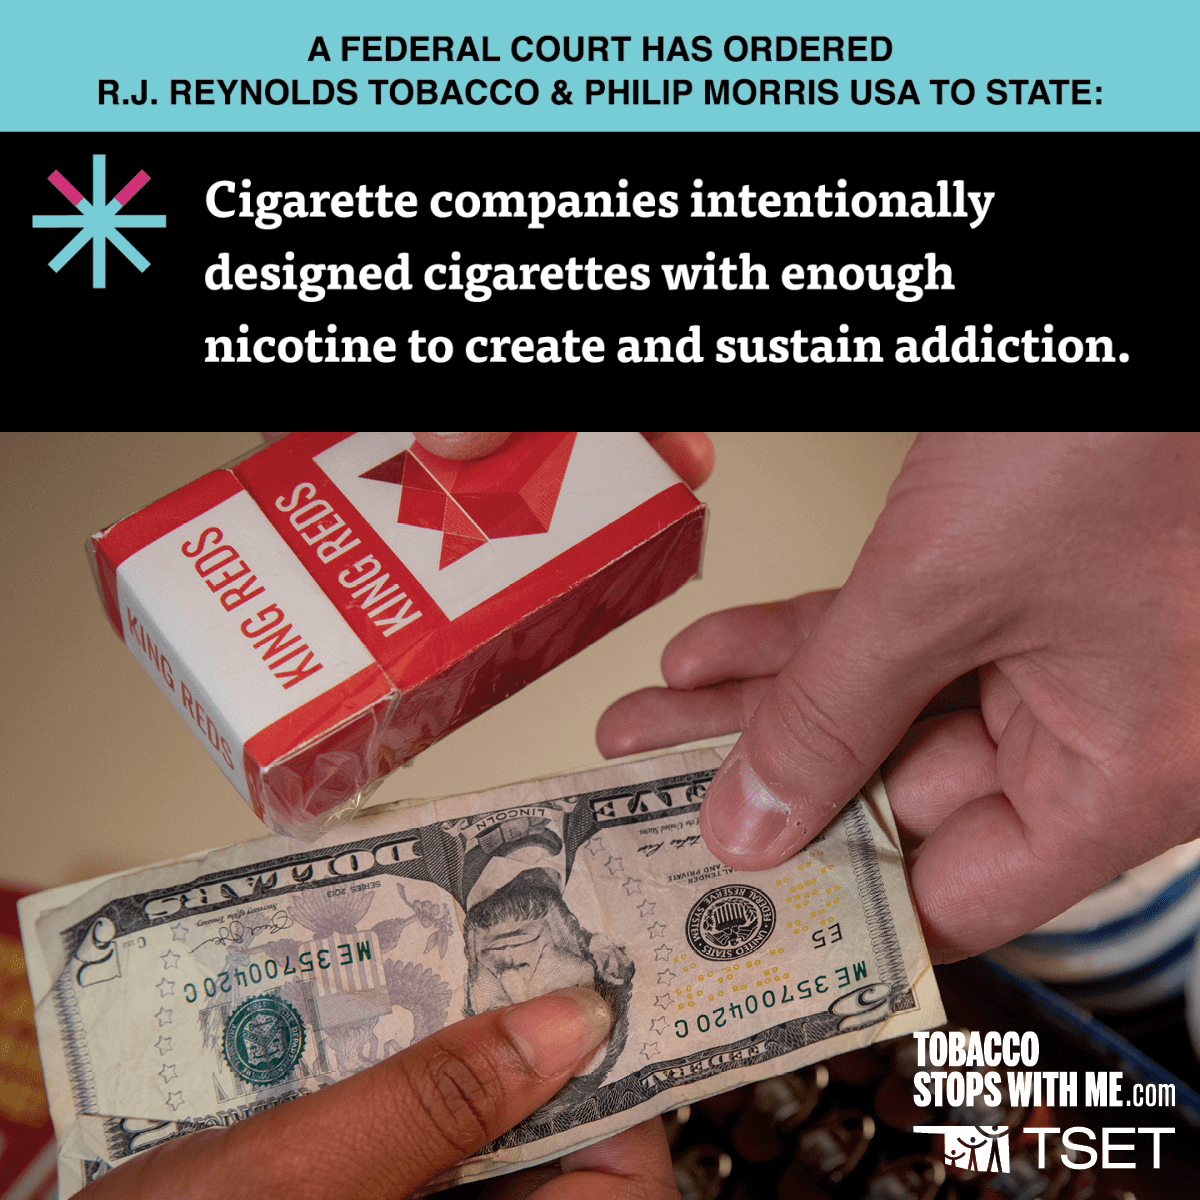 Cigarette companies intentionally designed cigarettes with enough nicotine to create and sustain addiction